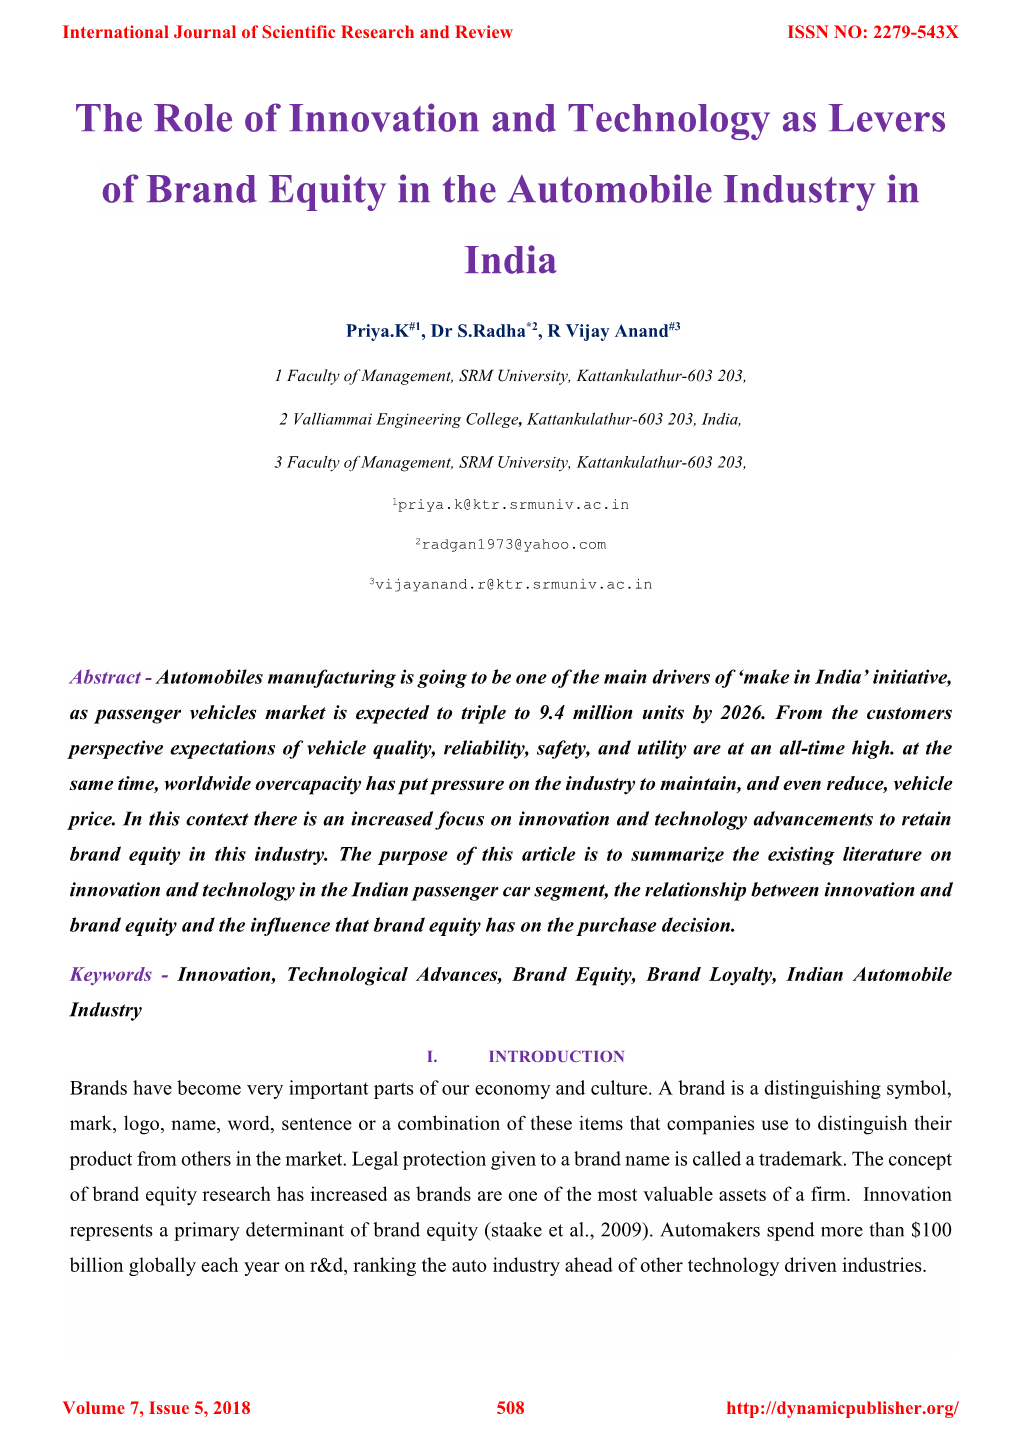 The Role of Innovation and Technology As Levers of Brand Equity in the Automobile Industry in India